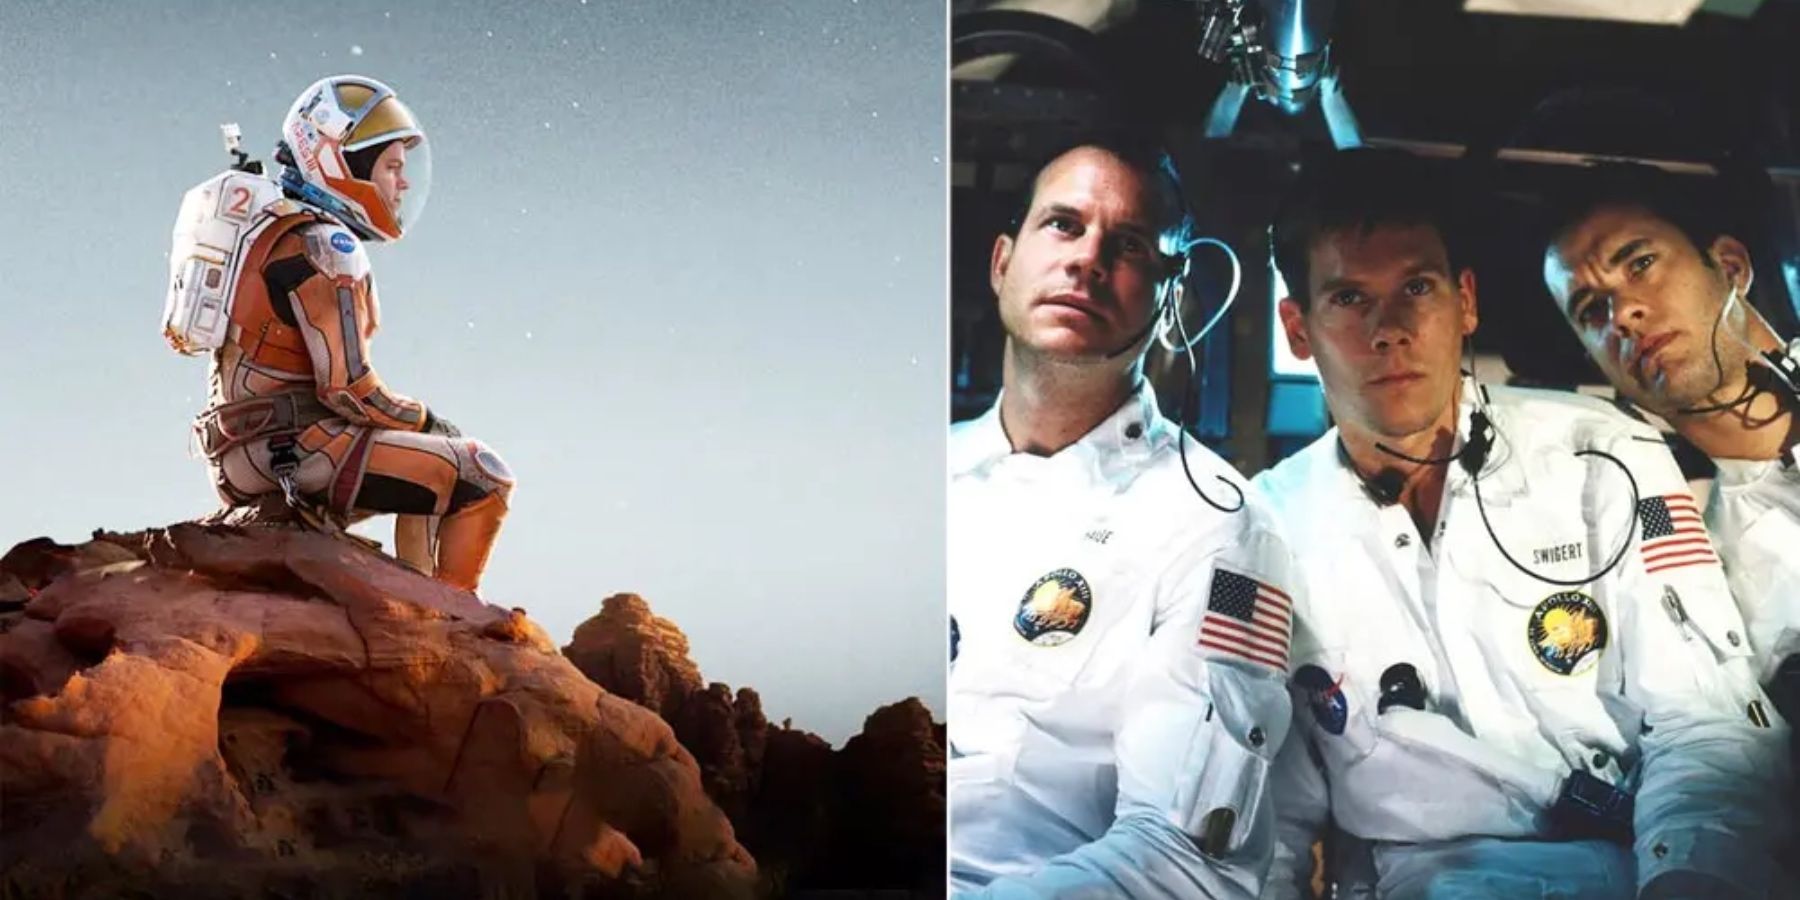 Matt-Damon-in-The-Martian-and-Bill-Paxton-Kevin-Bacon-and-Tom-Hanks-in-Apollo-13